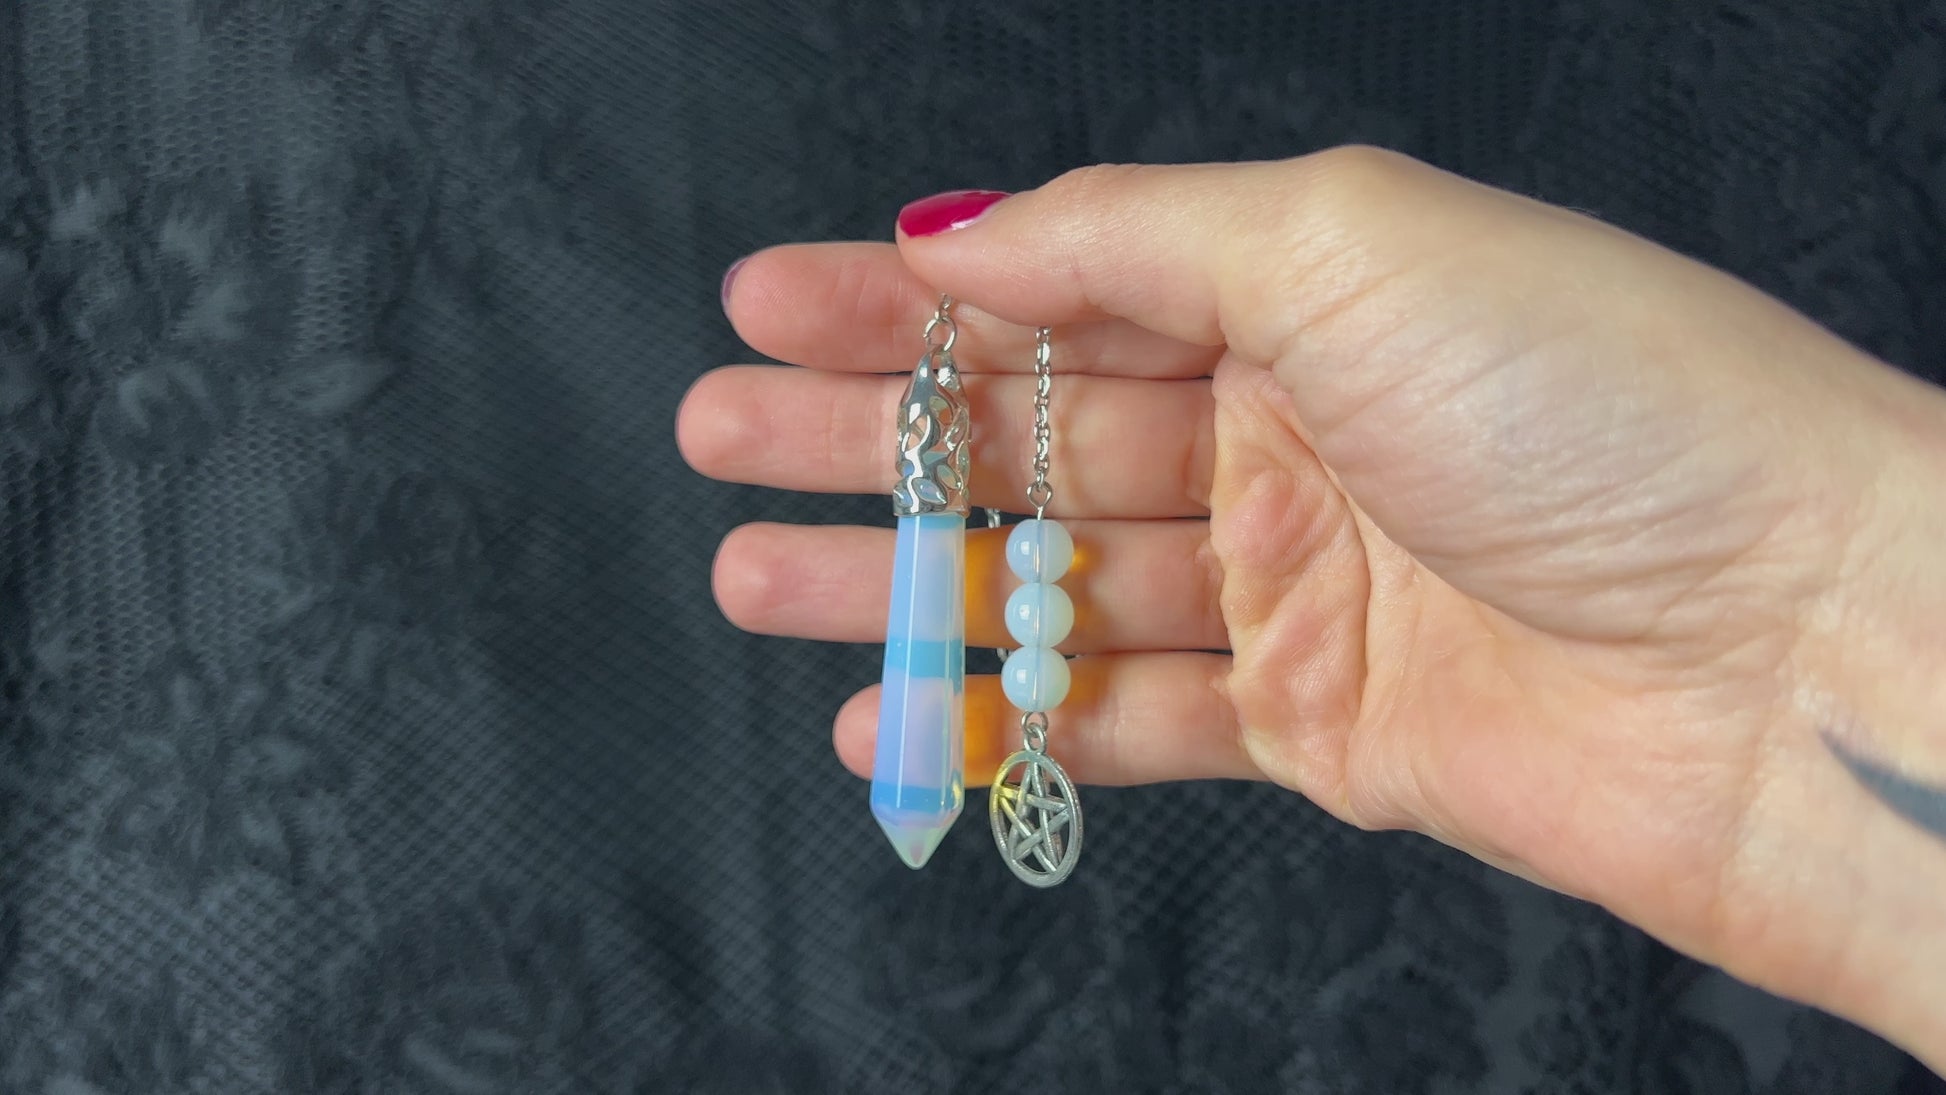 Opalite pendulum pentacle charm divination and dowsing magick tool witchcraft wiccan pendulum